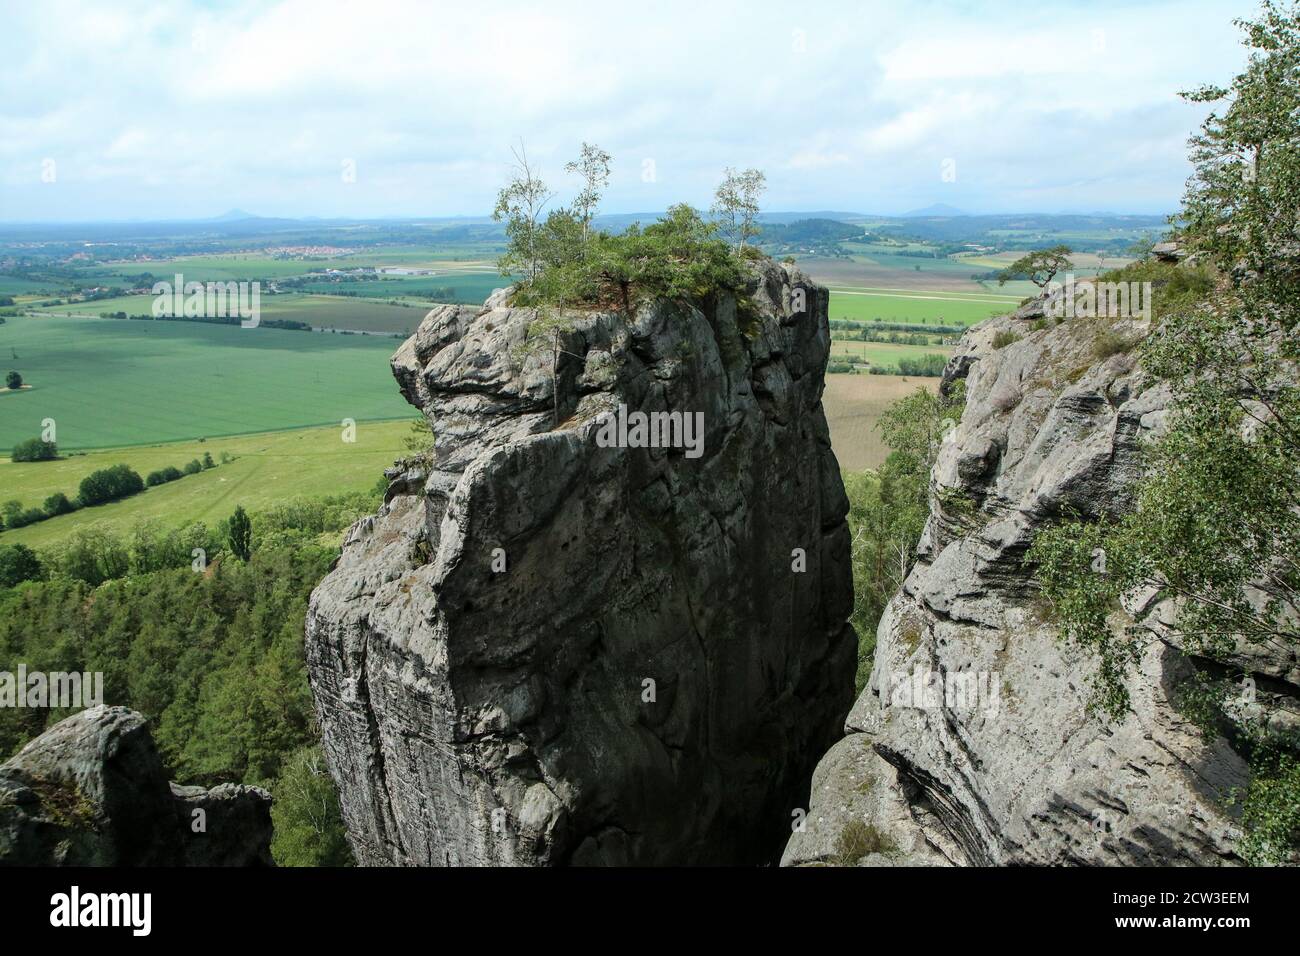 The picture from the natural area with rocks called 'Drábské světničky' (Dráb´ s rooms) in Czech Republic. Stock Photo